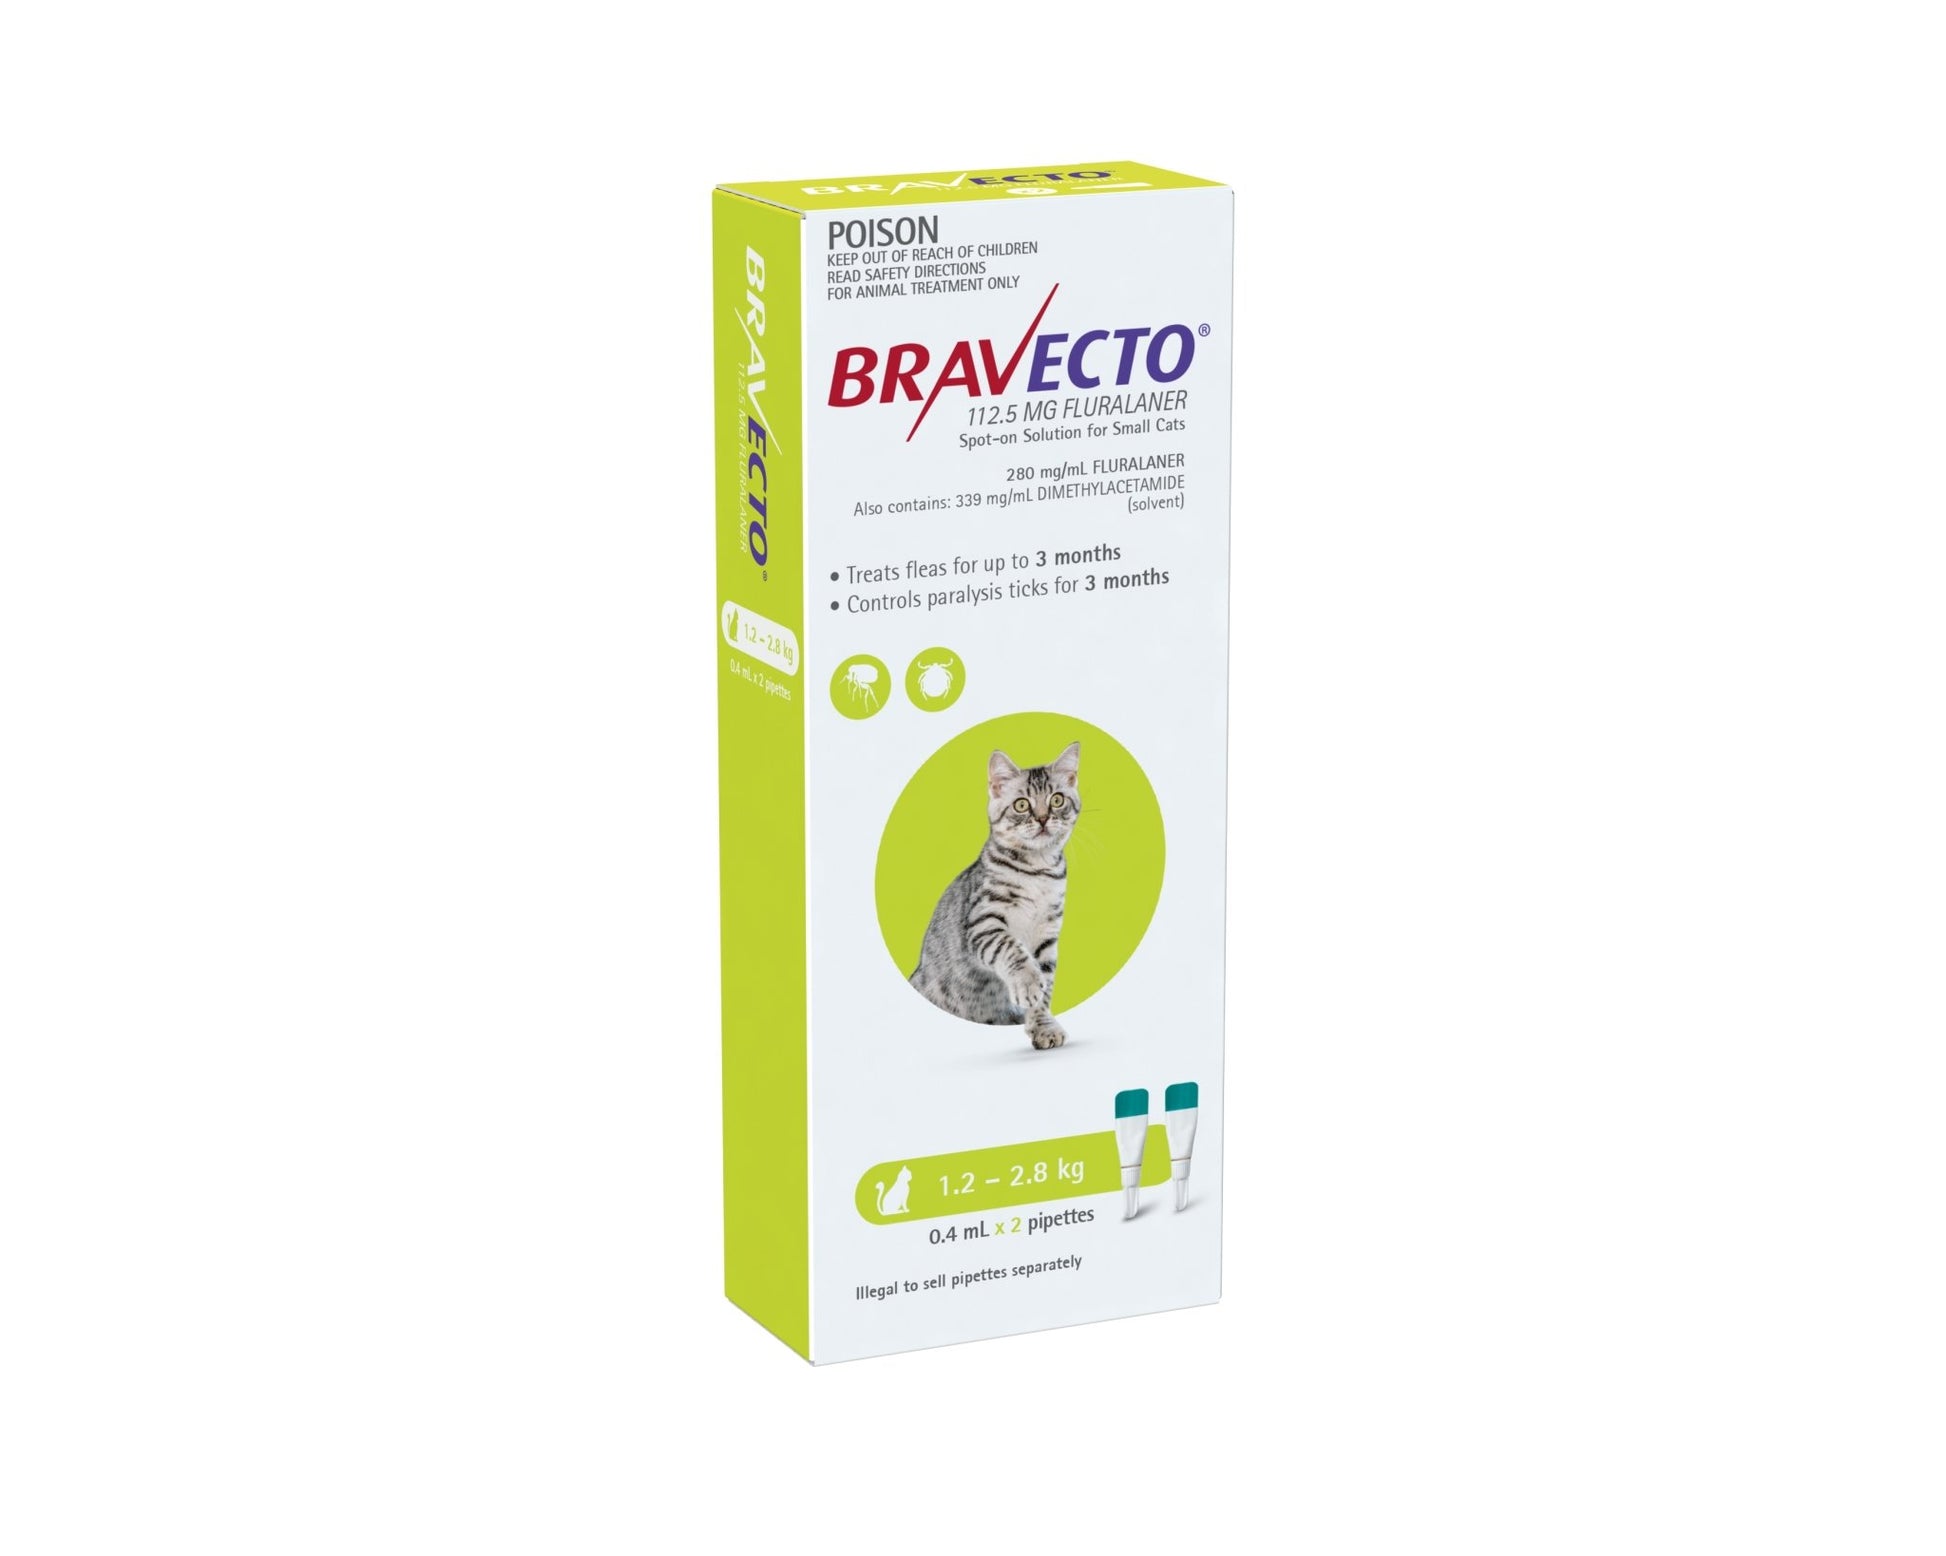 Bravecto Spot On for Cats 1.2 - 2.8kg 2 Pack Green - Woonona Petfood & Produce